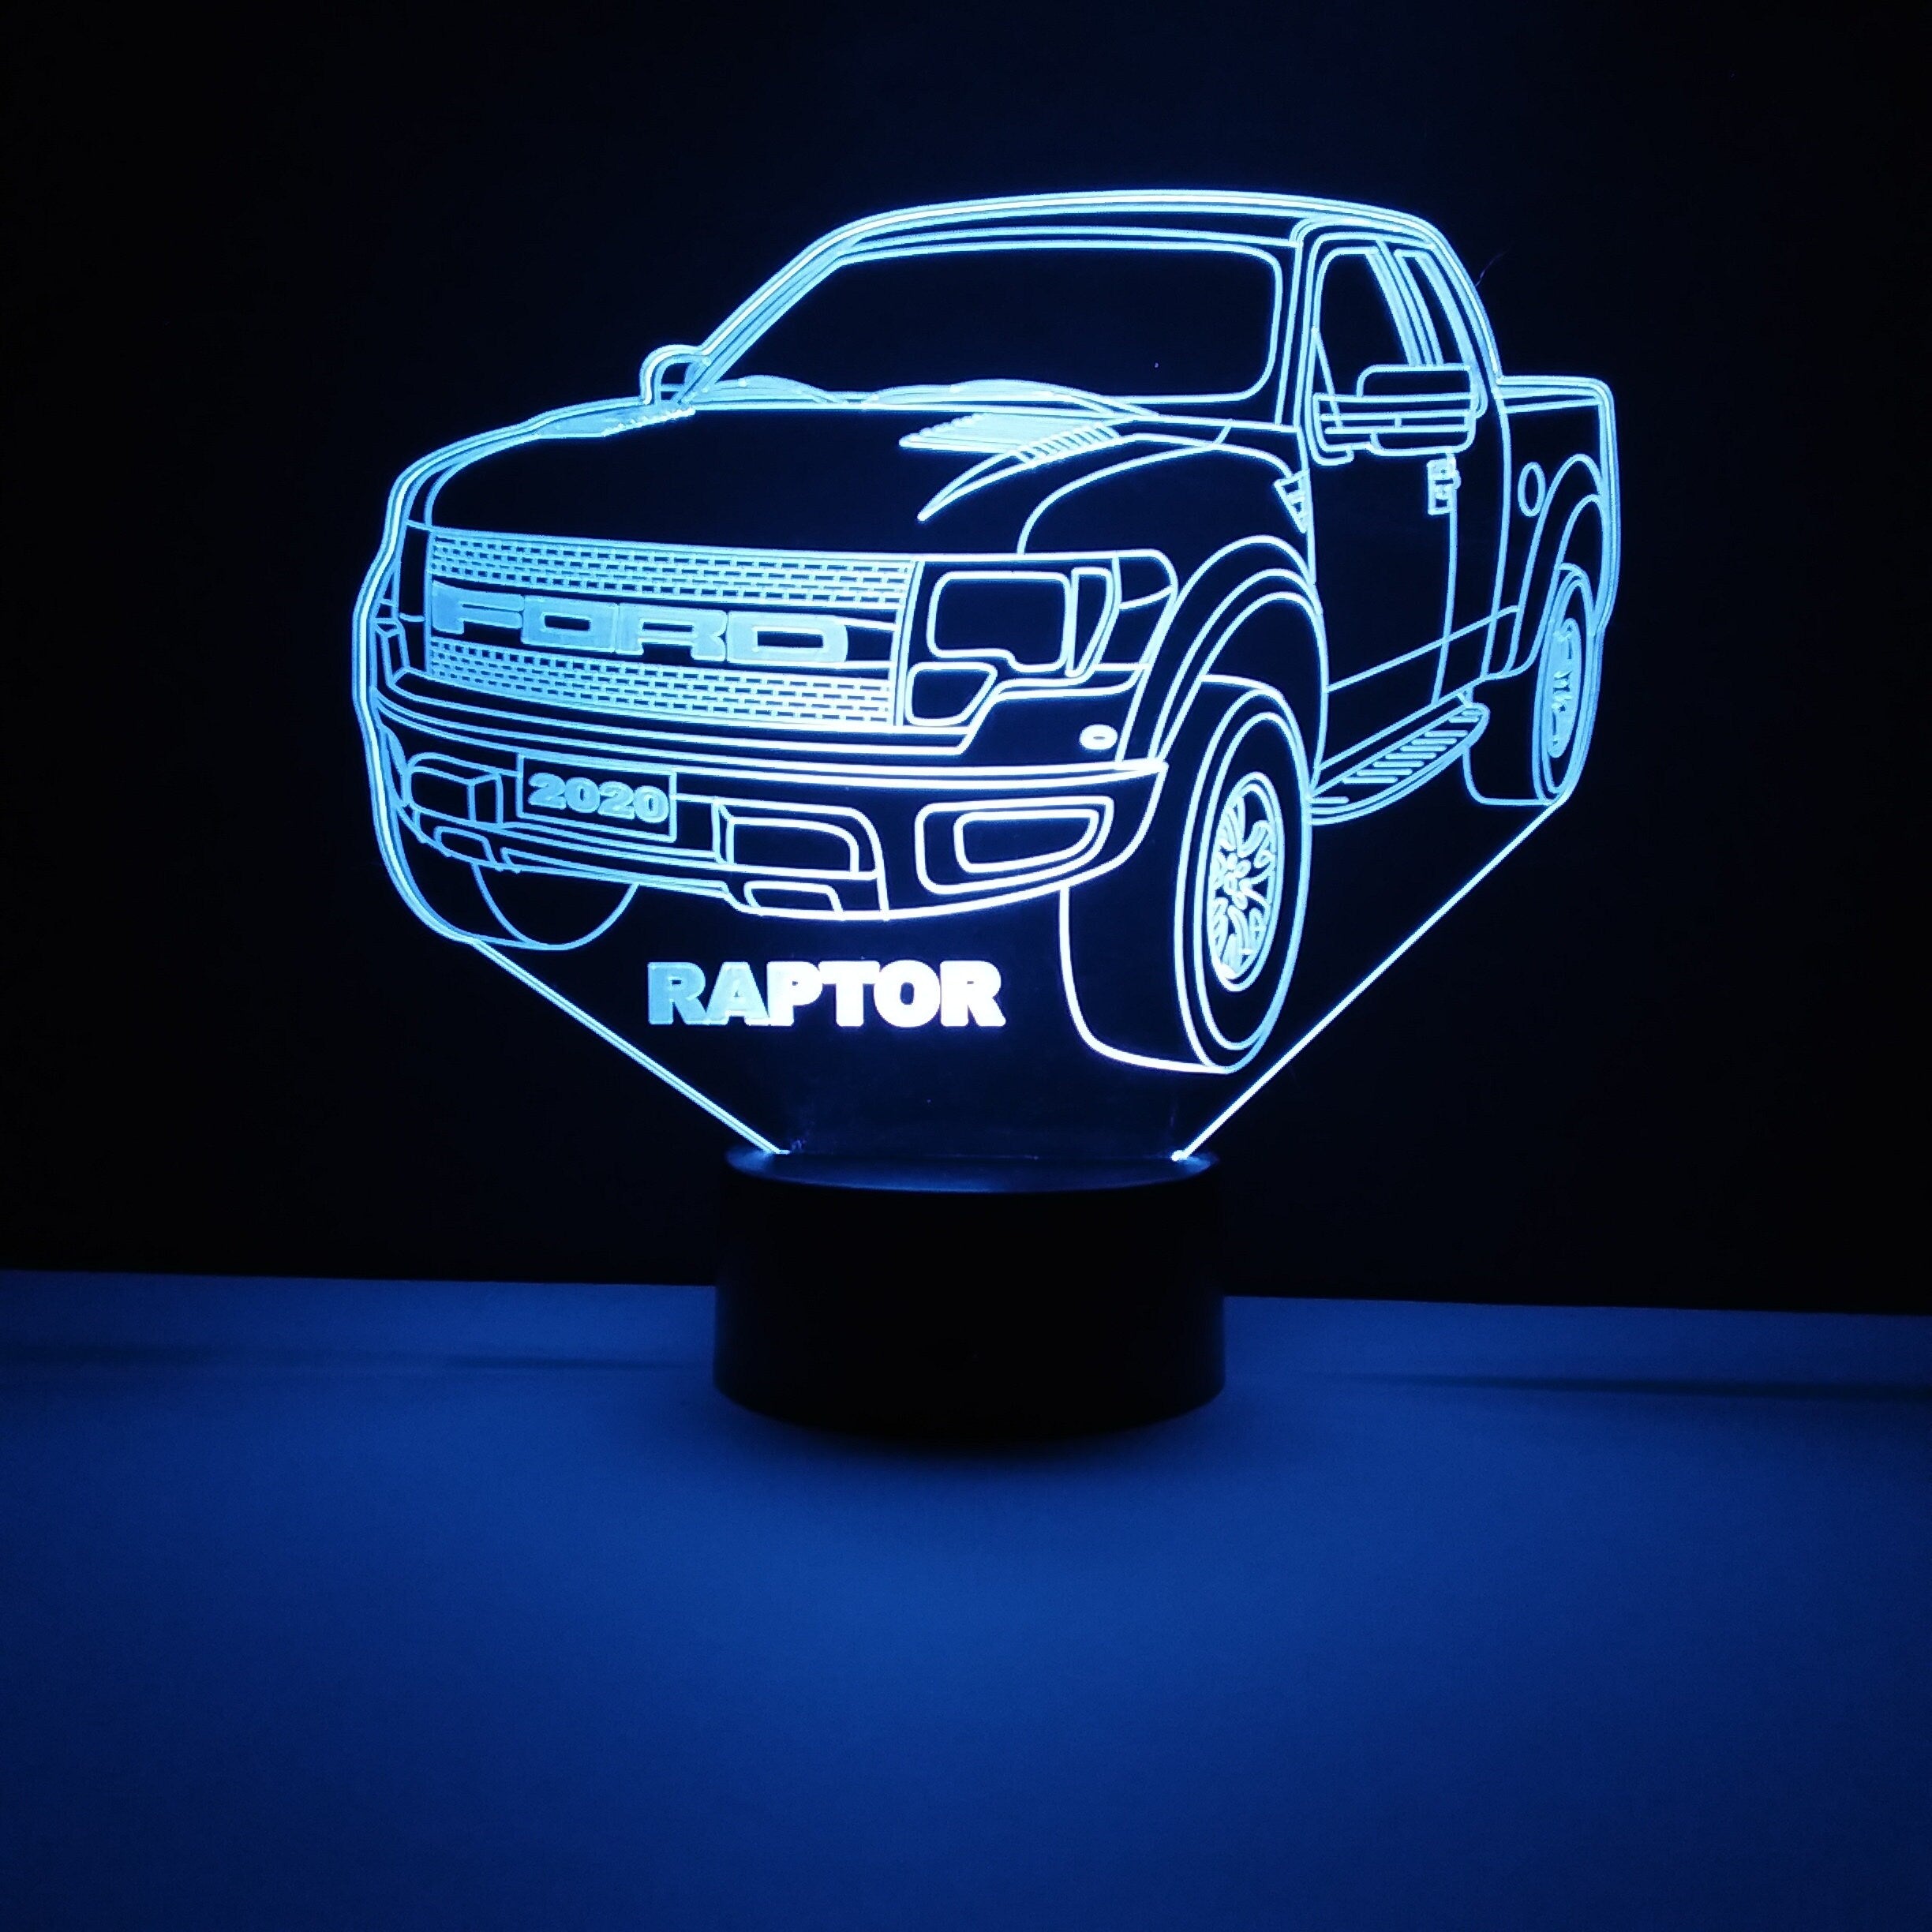 Awesome "F-150 Ford Raptor" 3D LED lamp (1229) - FREE SHIPPING!